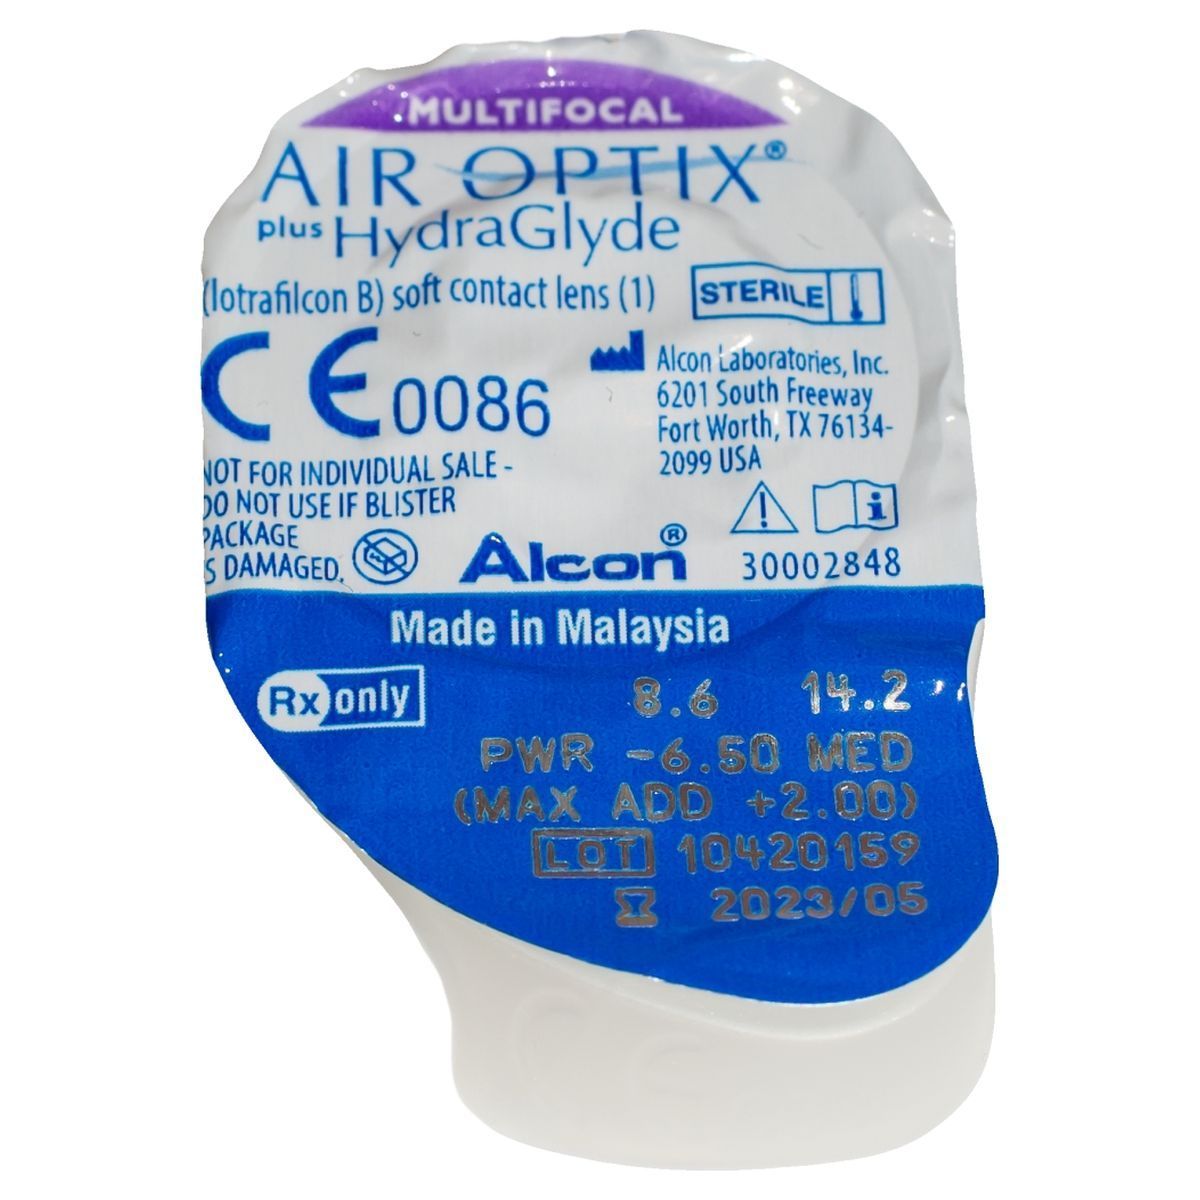 AIR OPTIX HYDRAGLYDE MULTIFOCAL MONTHLY DISPOSABLE MULTIFOCAL CONTACT LENSES (6 LENSES)